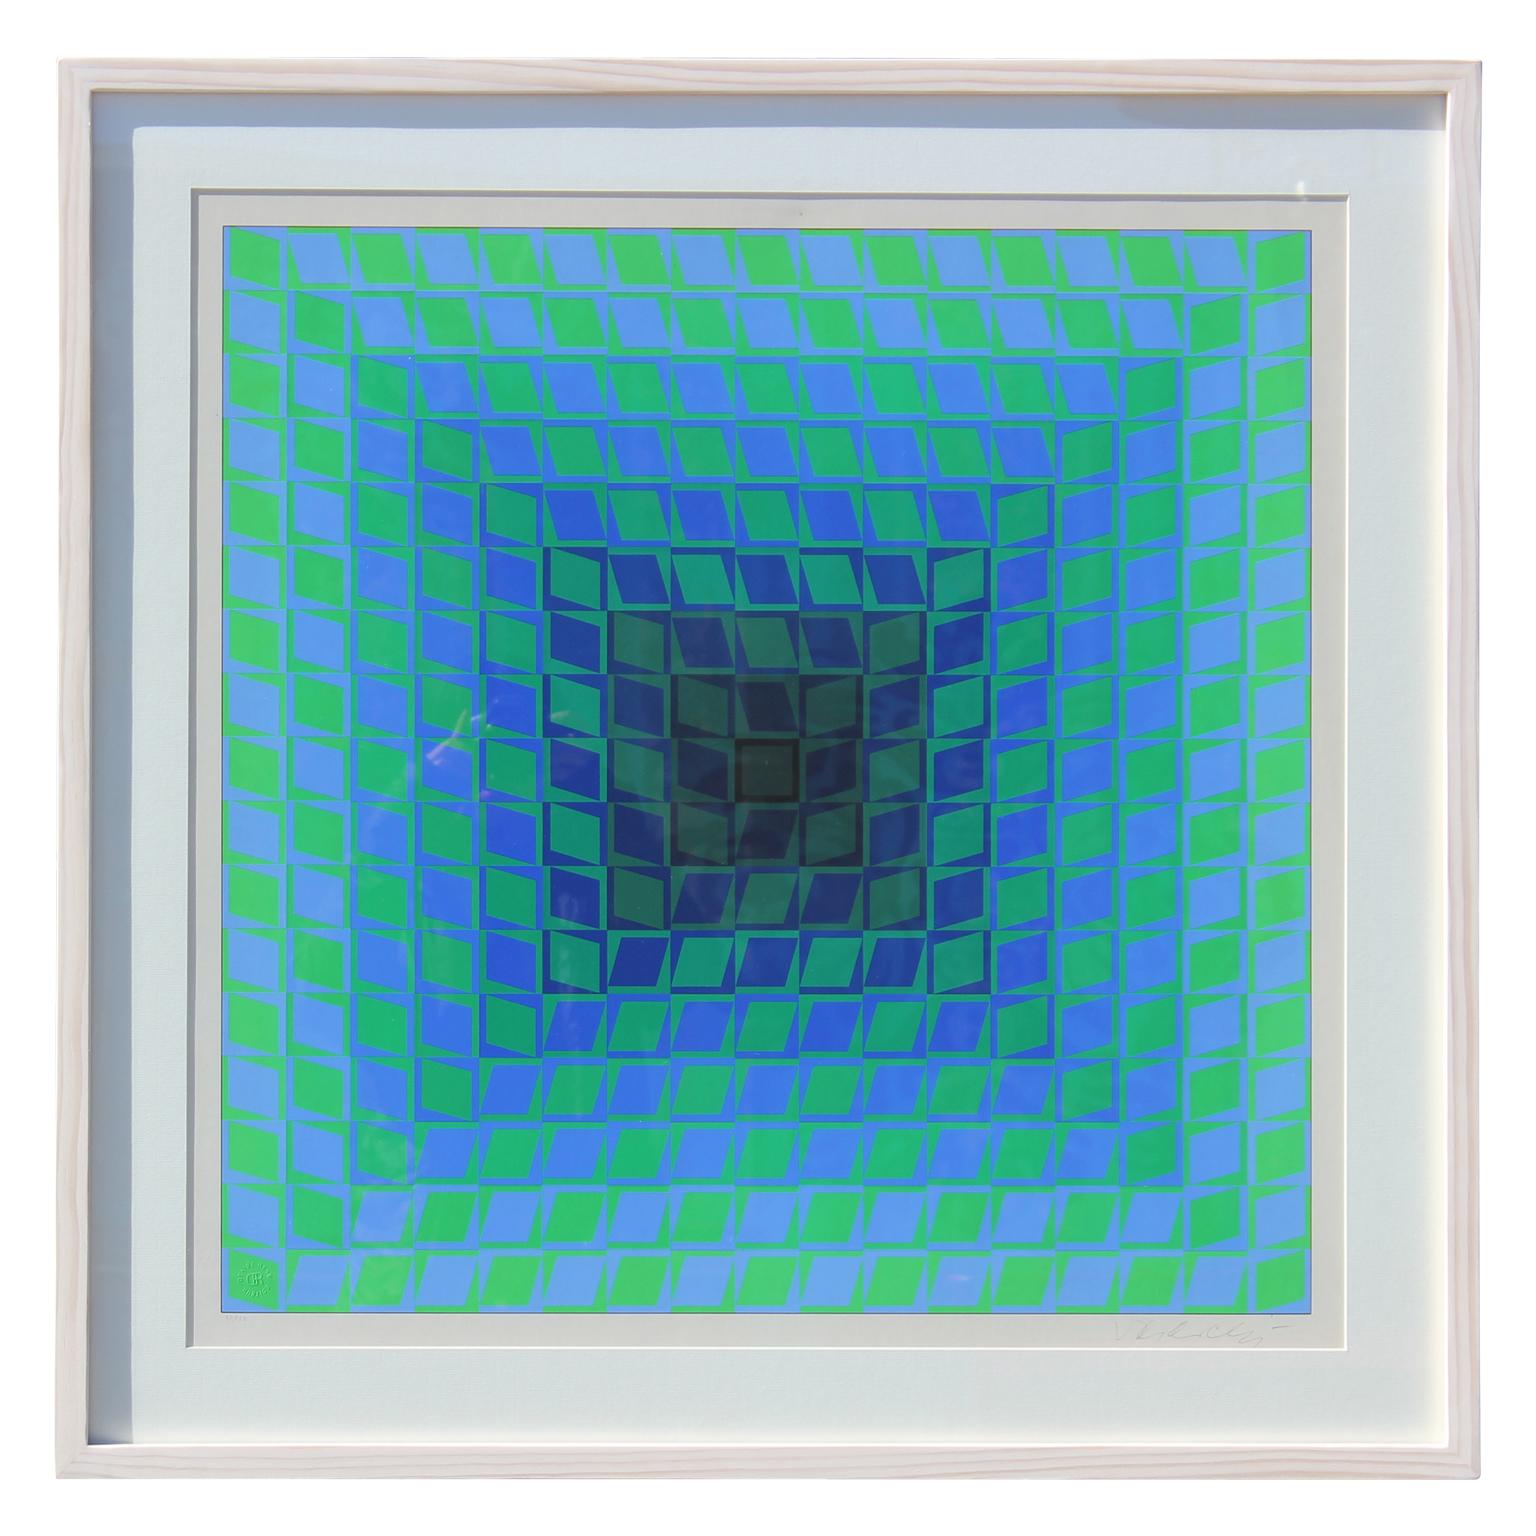 Victor Vasarely Print - "Untitled from Permutations" Geometric Abstract Edition 37 / 150